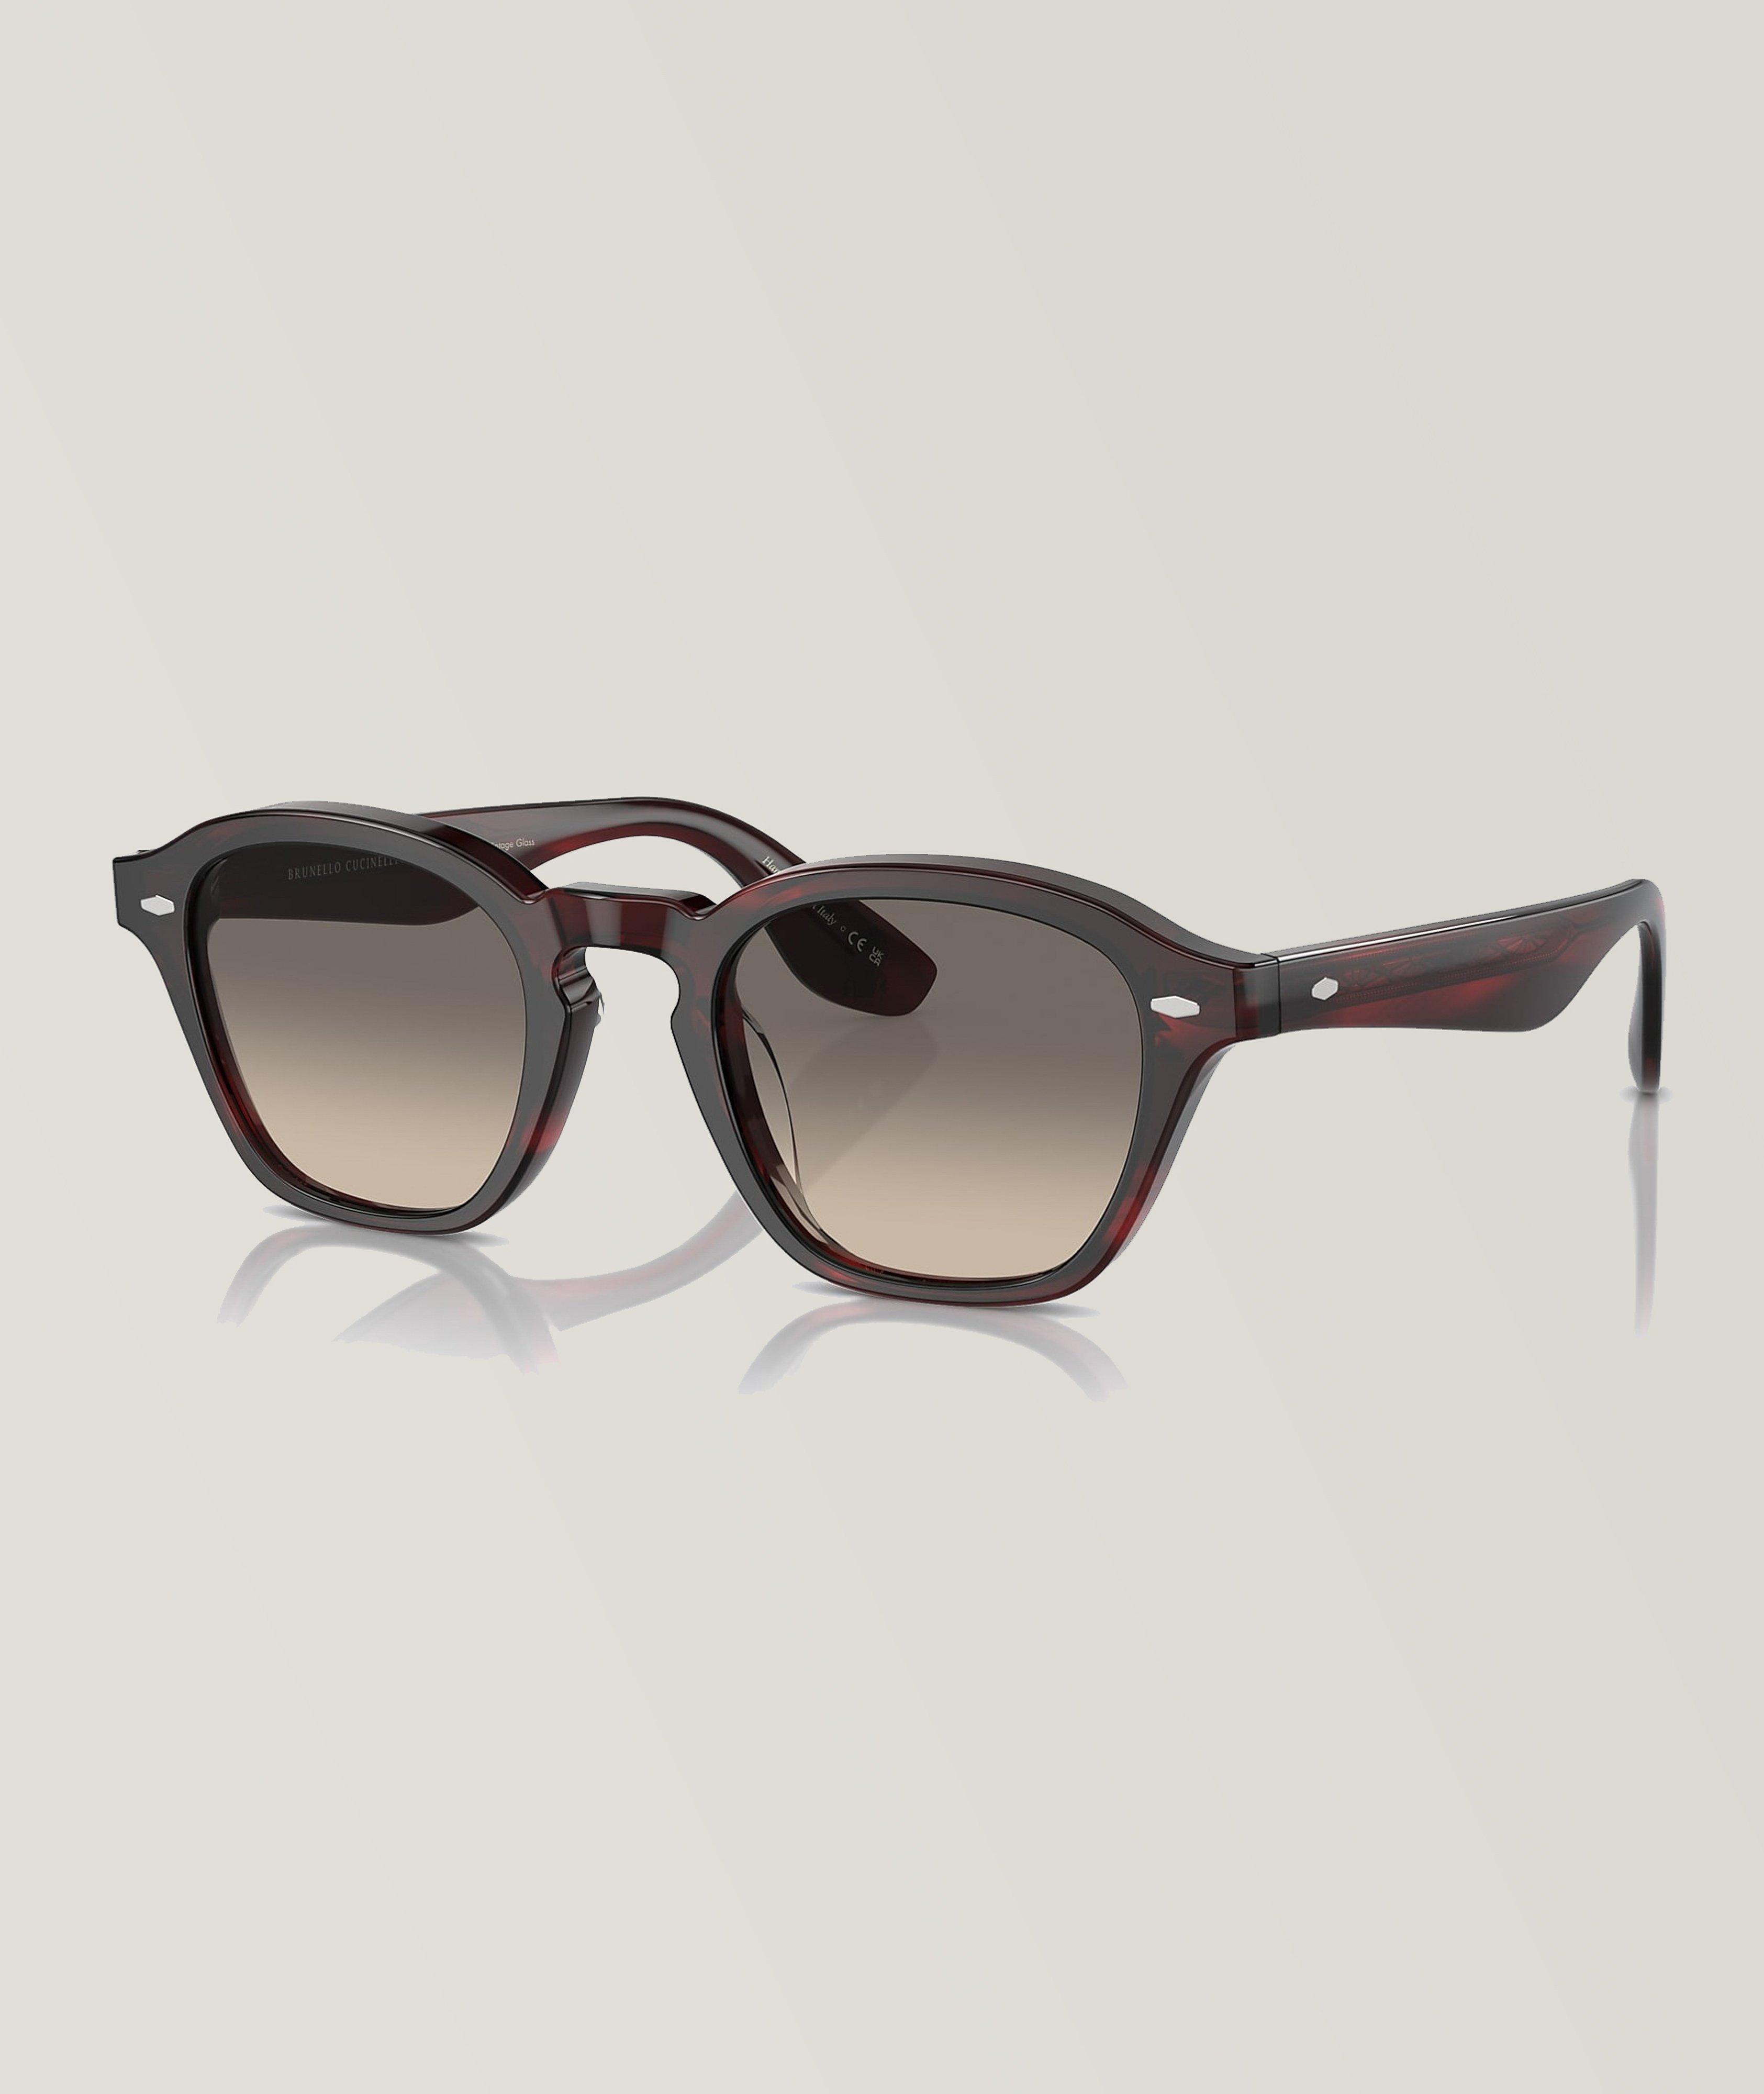 Lunettes de soleil Peppe, collection Oliver Peoples image 0